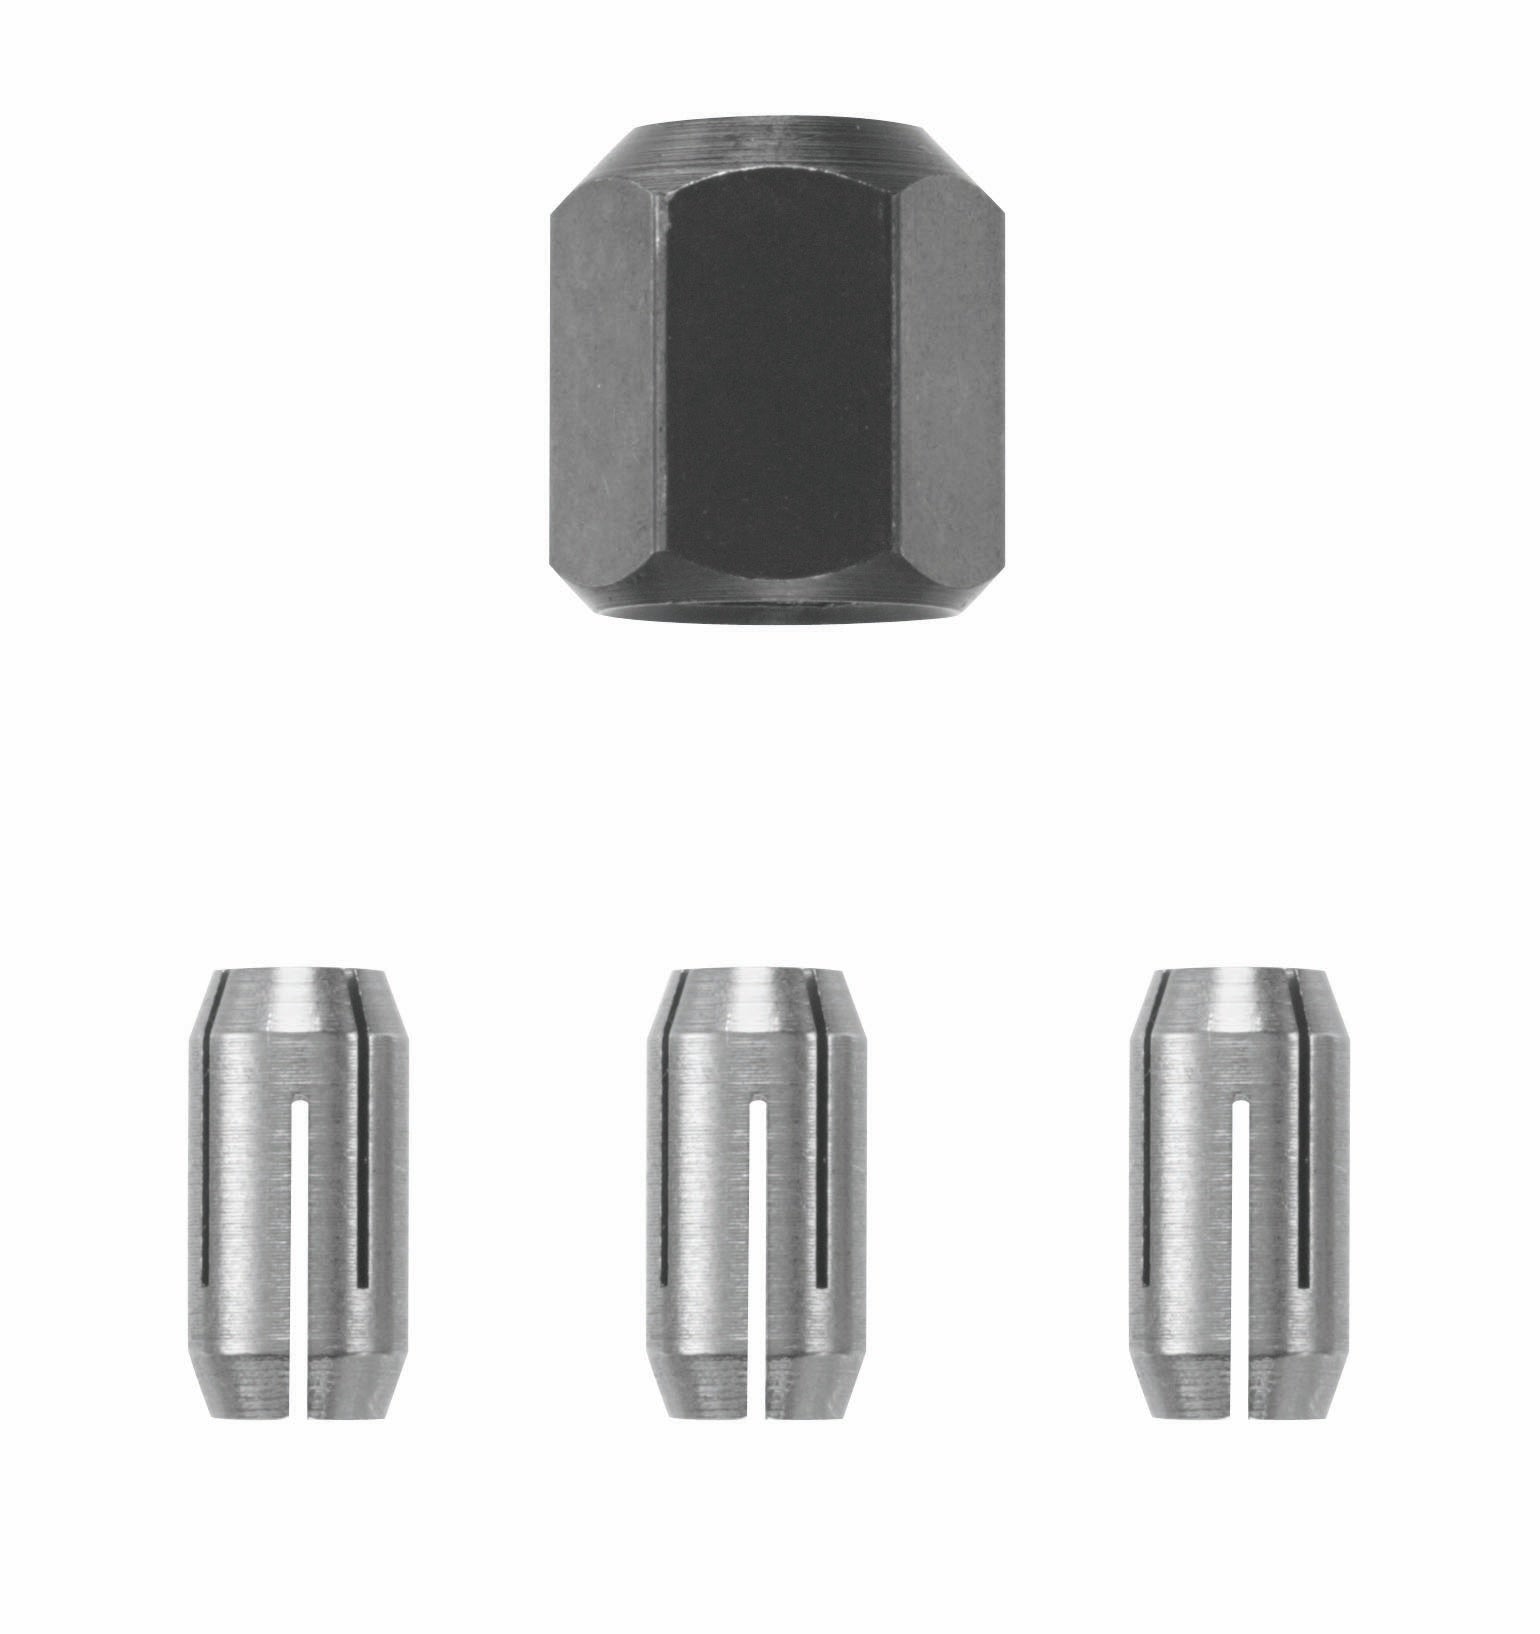 RotoZip Collet & Nut Kit - 1/8", 5/32", 1/4"